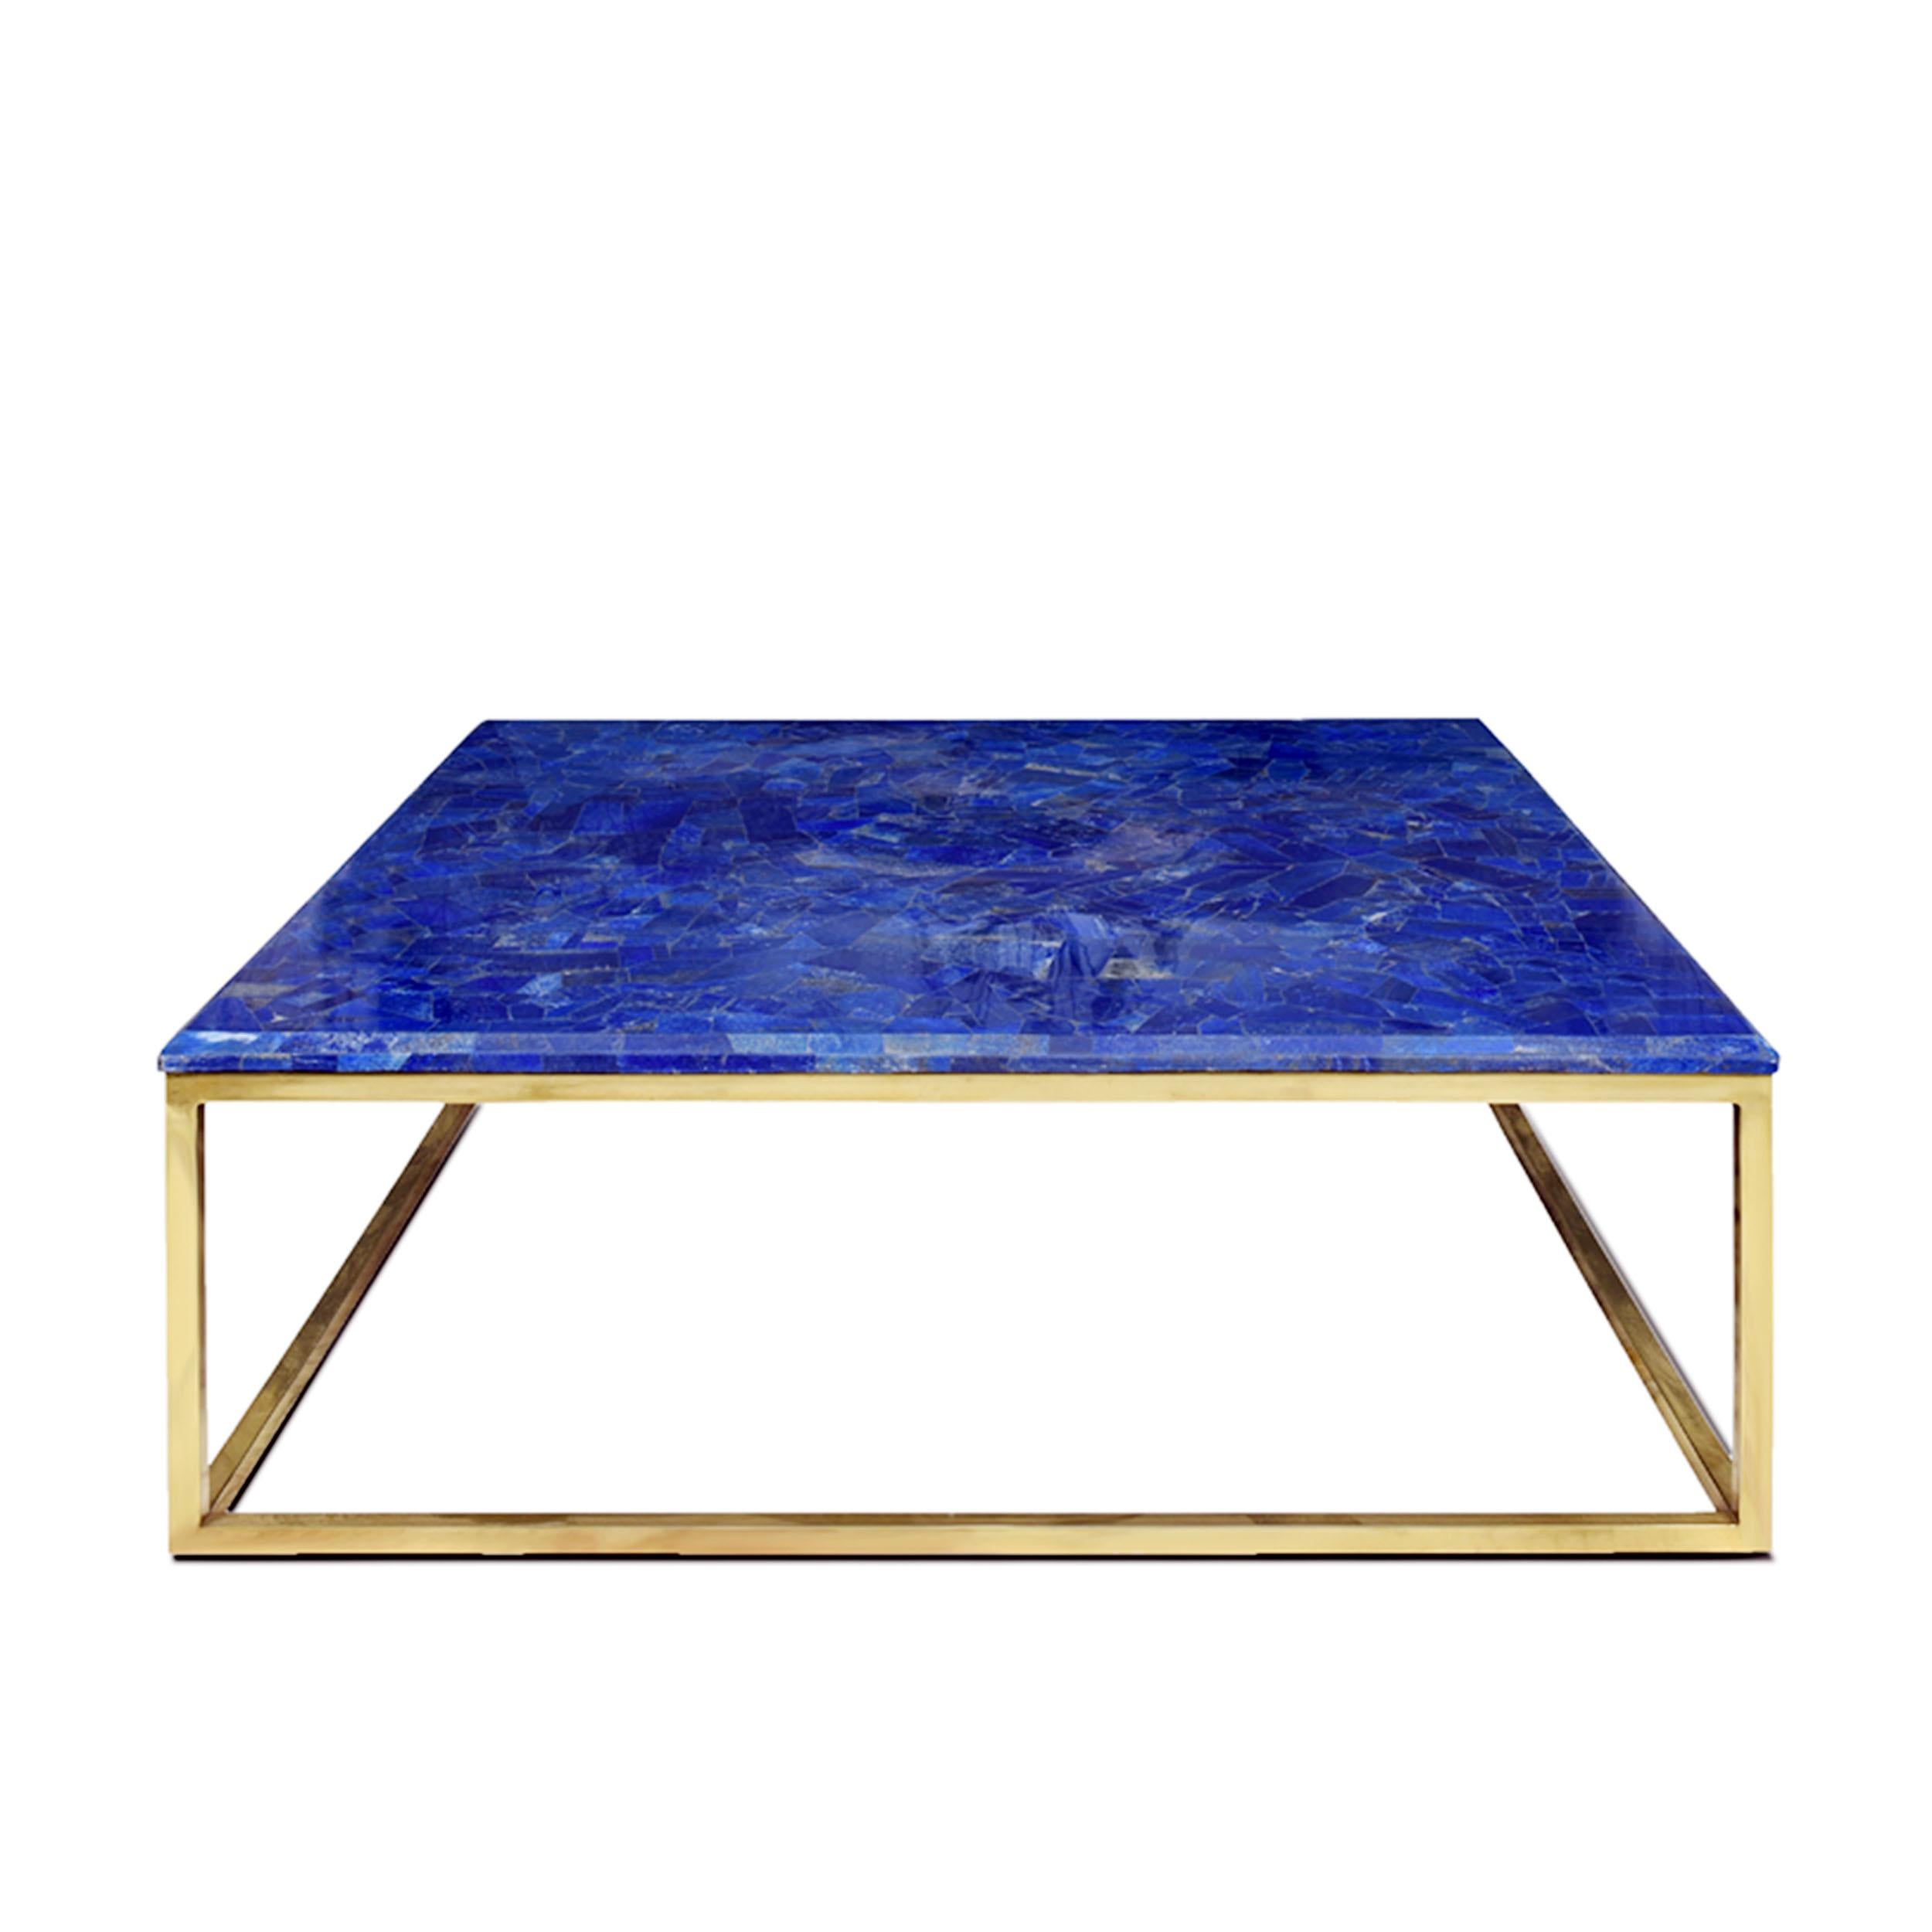 Majorelle Centre Table by Studio Lel
Dimensions: D 107 x W 107 x H 41 cm 
Materials: Lapis Lazuli, brass.

Taking its name from the Majorelle Garden in Marrakech, which was painted entirely by Jacques Majorelle in his signature rich shade of lapis